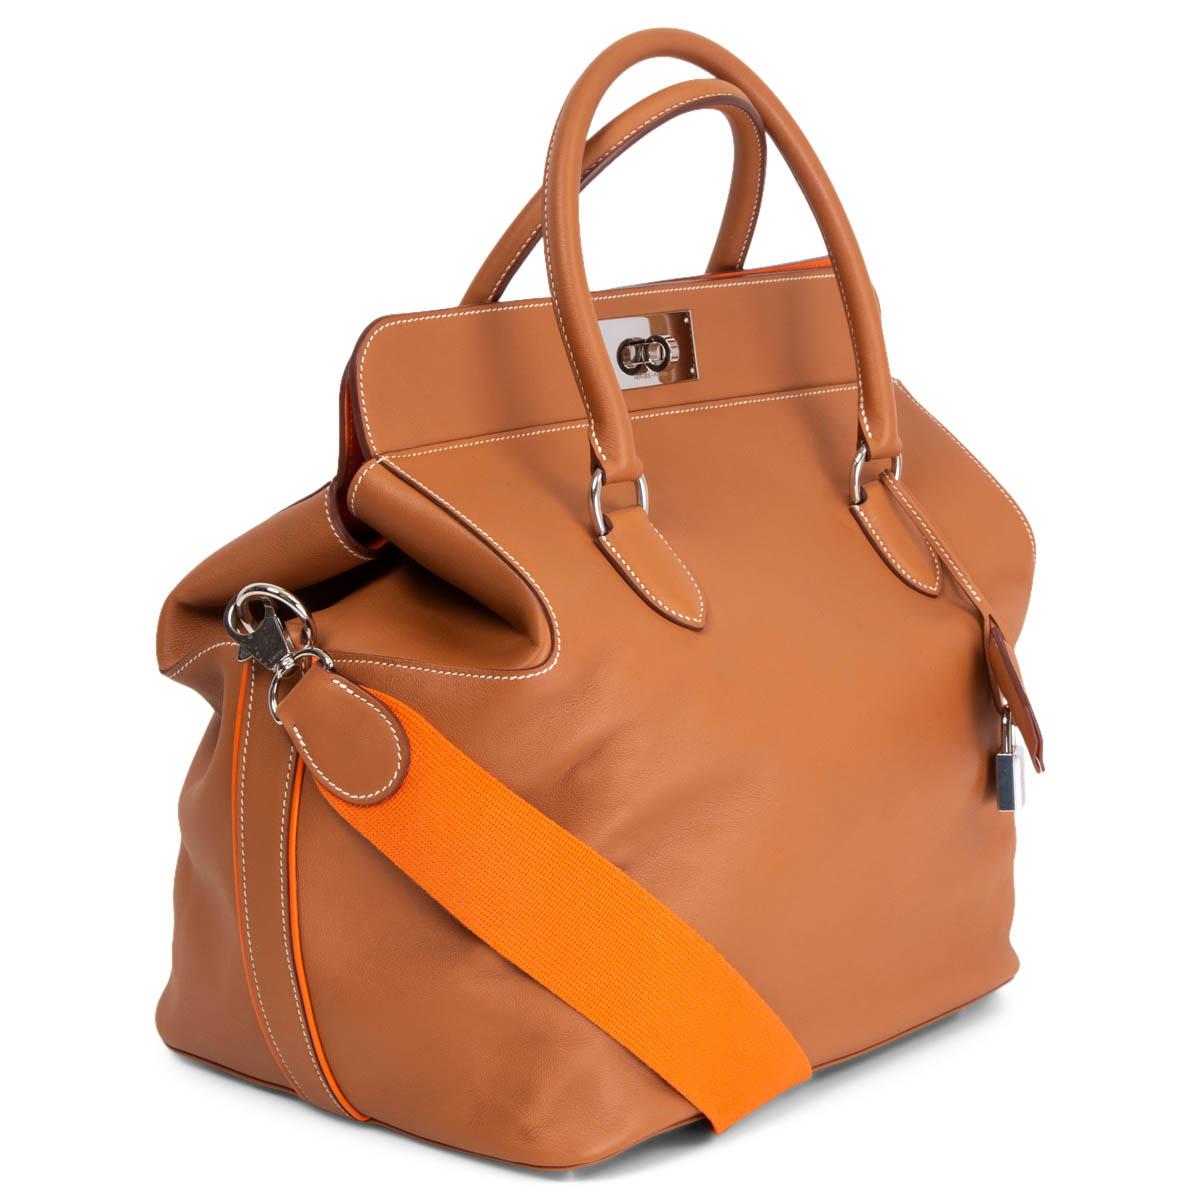 100% authentic Hermès Toolbox 33 Verso bag in Gold (camel) smooth Swift calfskin. The bag features rolled leather top handles with palladium metal links, an optional orange canvas shoulder strap with palladium clasps, and palladium metal frontal